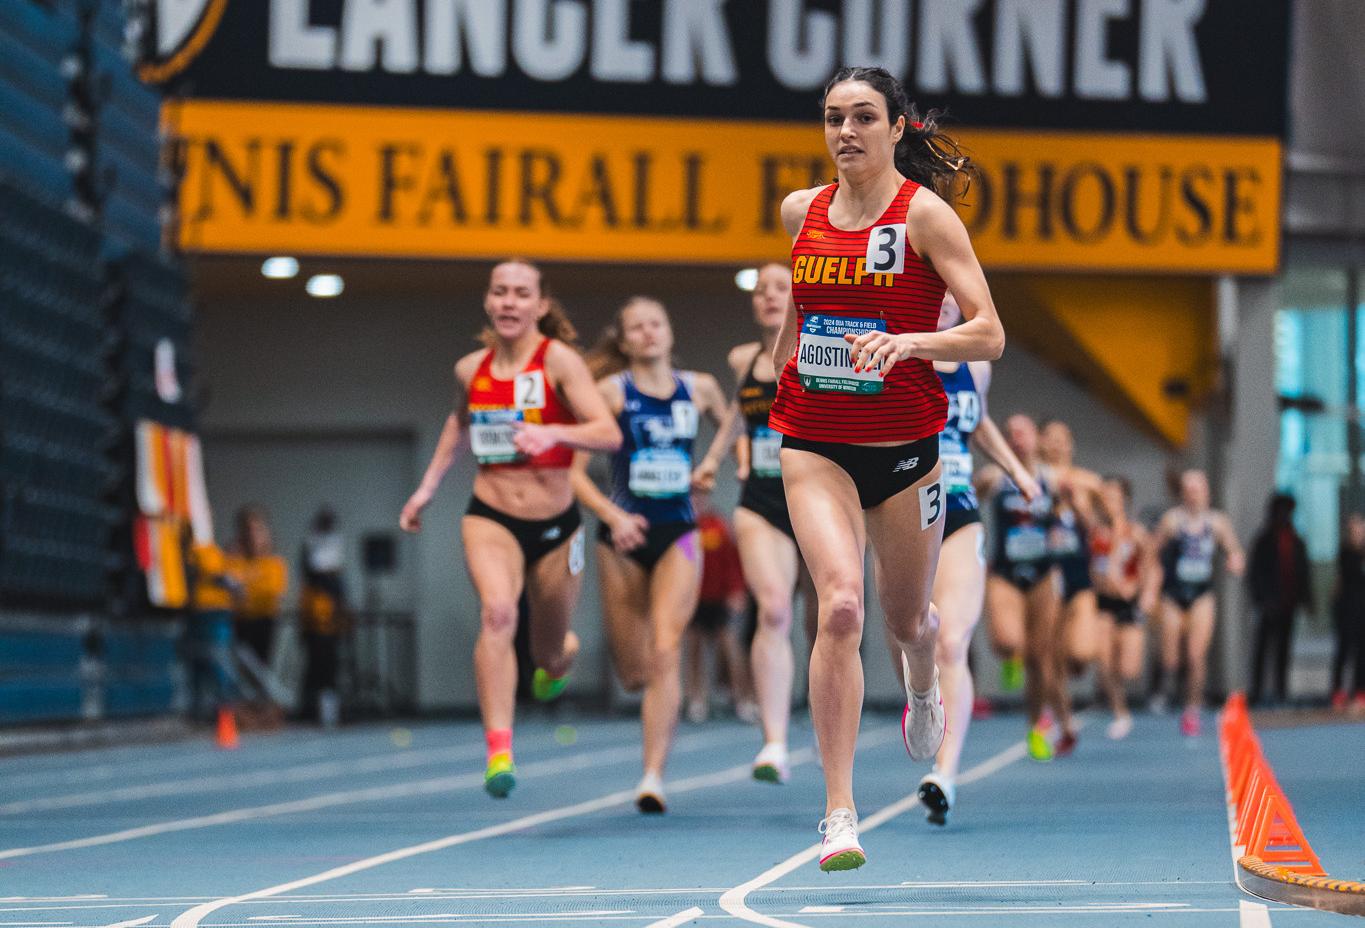 Image of Guelph Track athlete Julia Agostinelli running on the track lane.